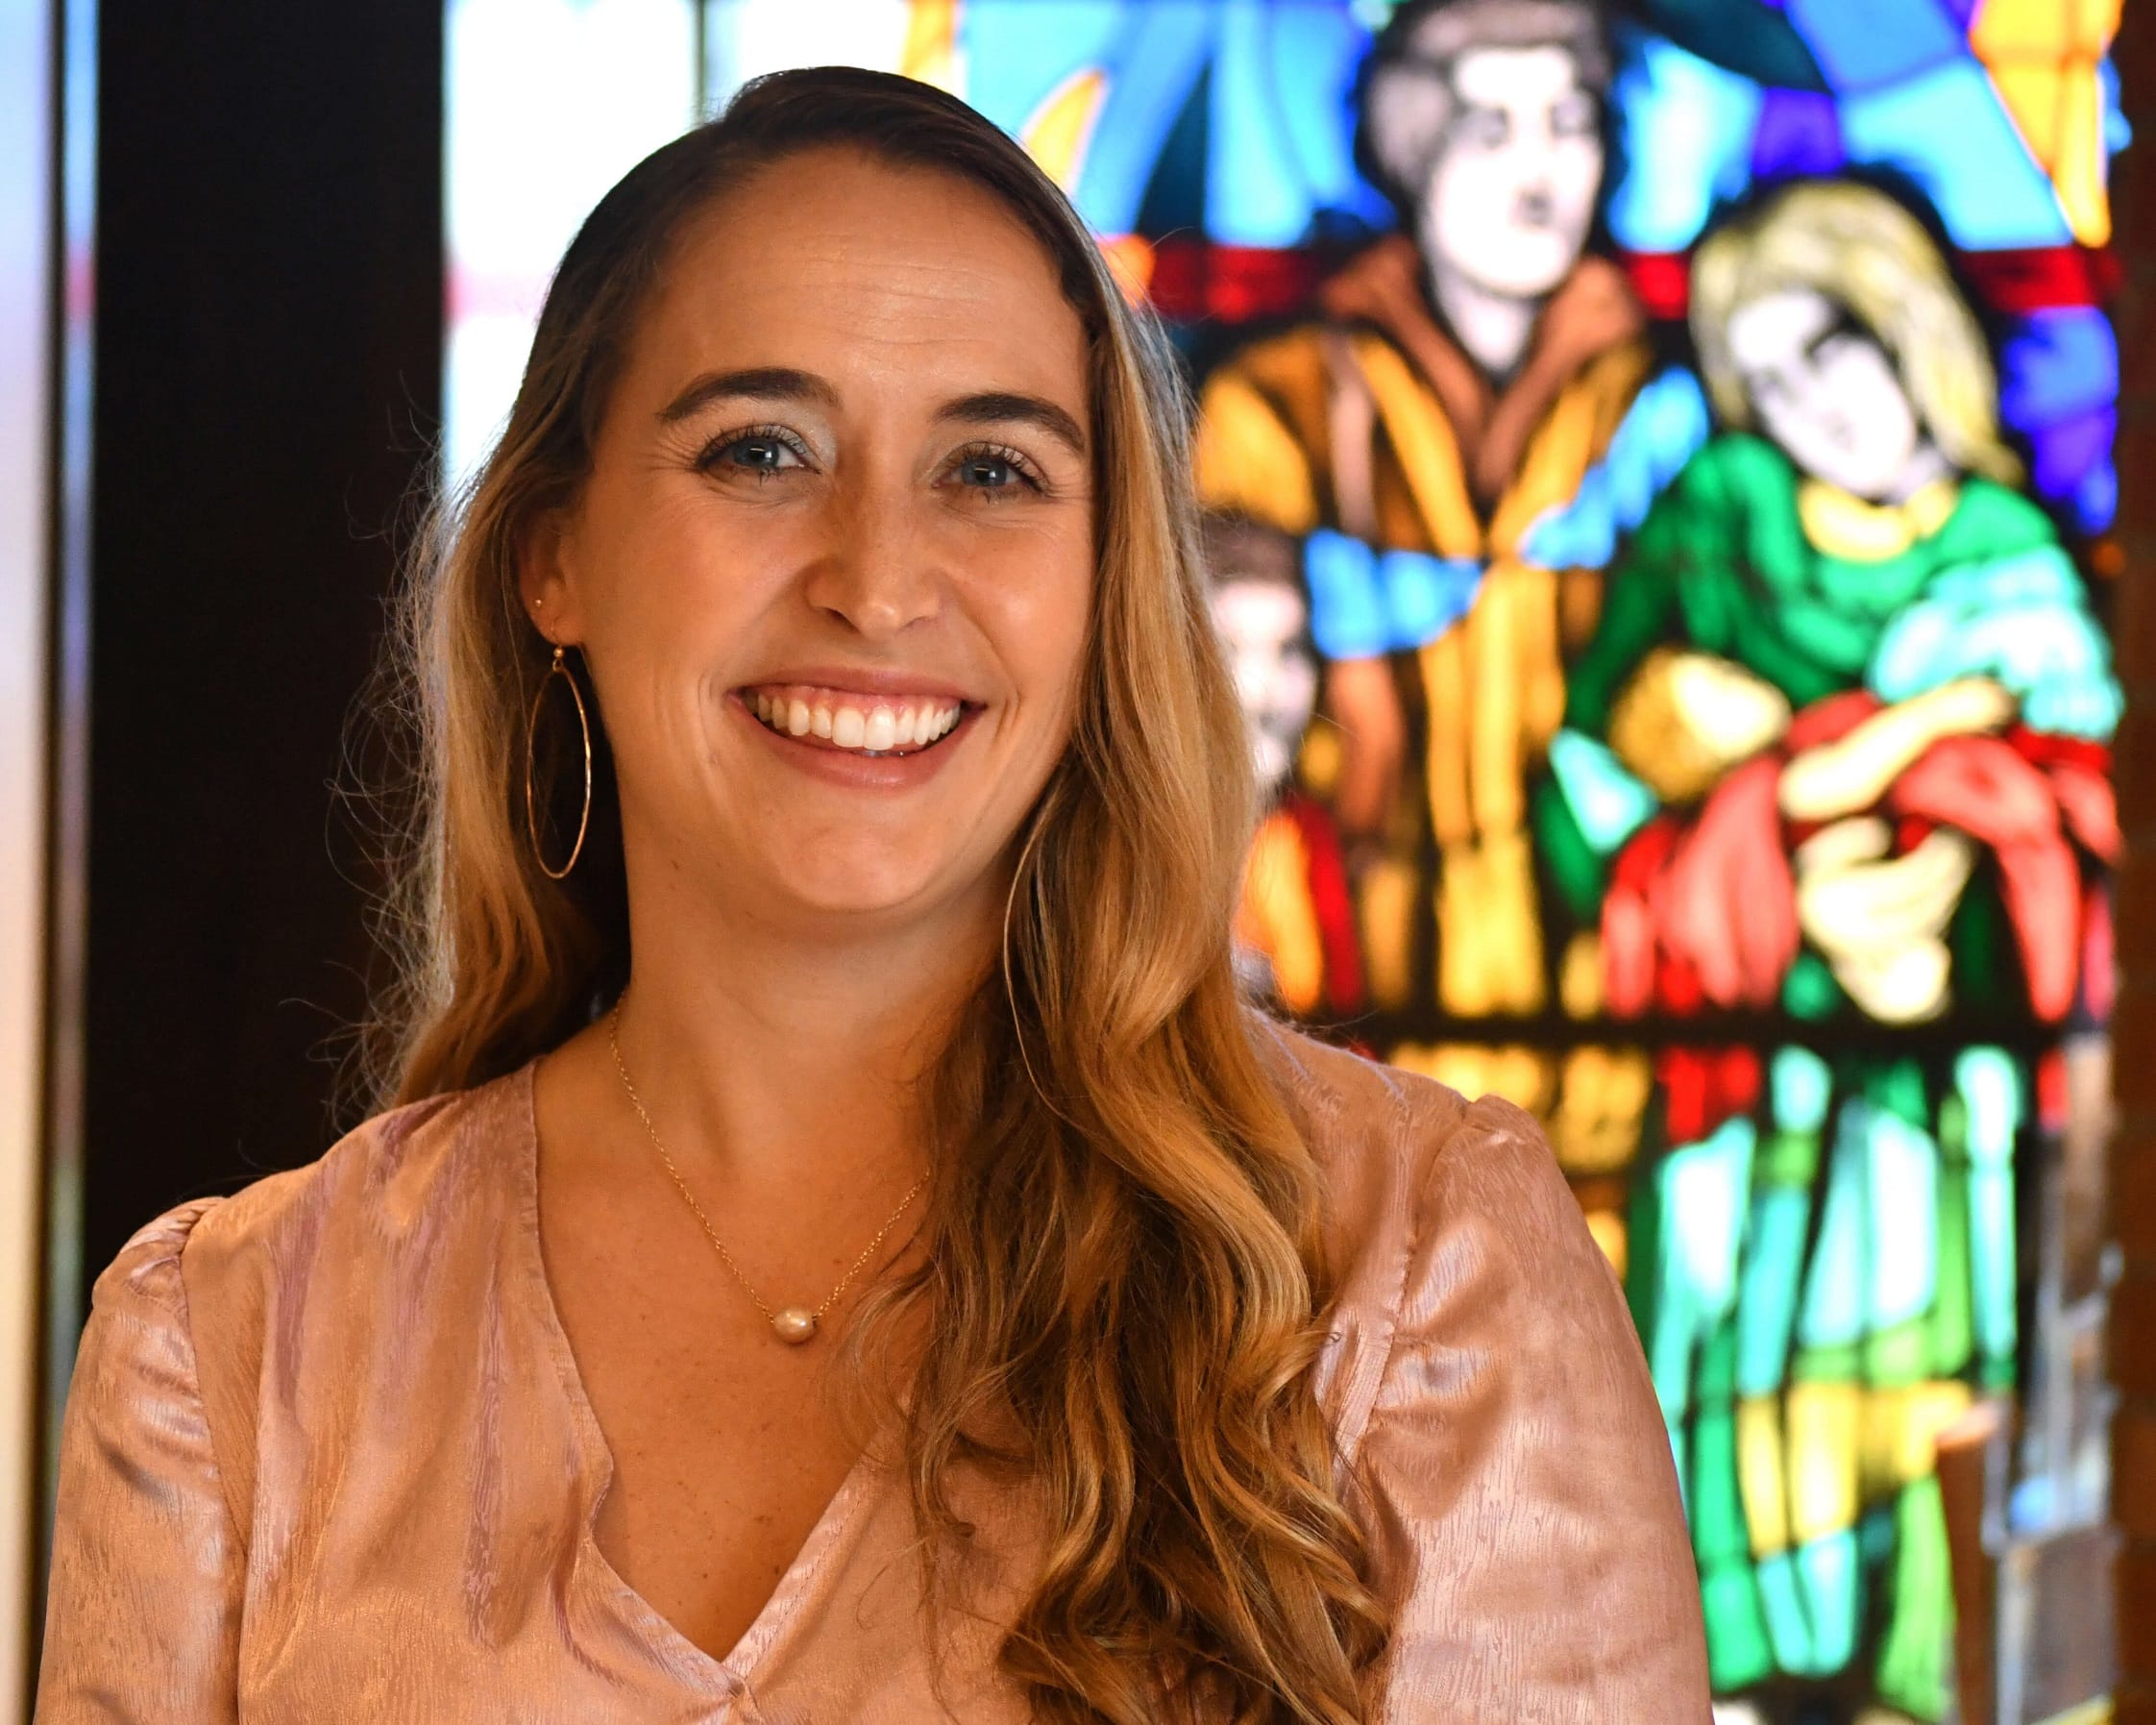 A woman smiling in front of a stained glass window.